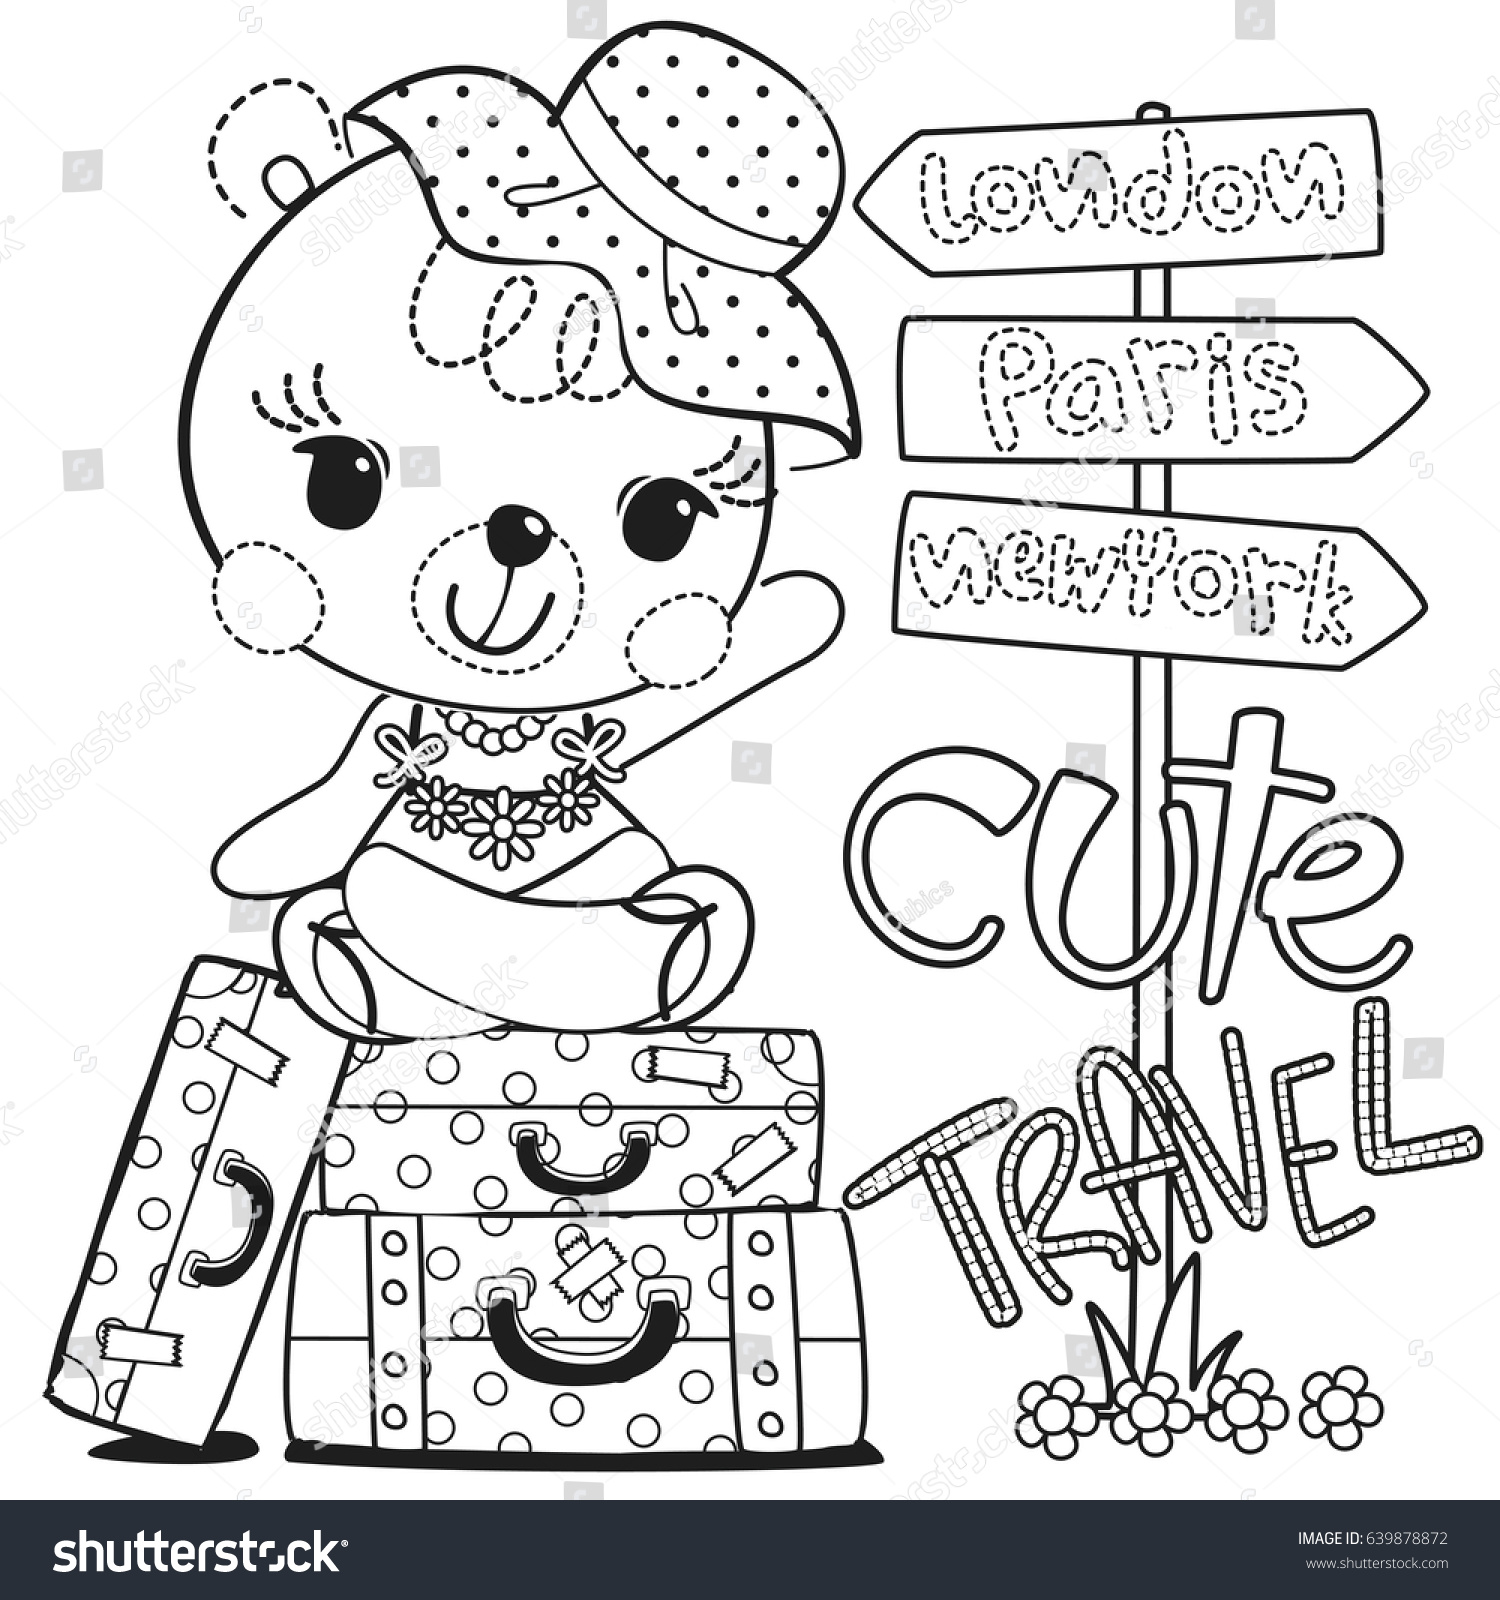 Coloring page Cute cartoon teddy bear girl sitting on suitcase with road sign isolated on